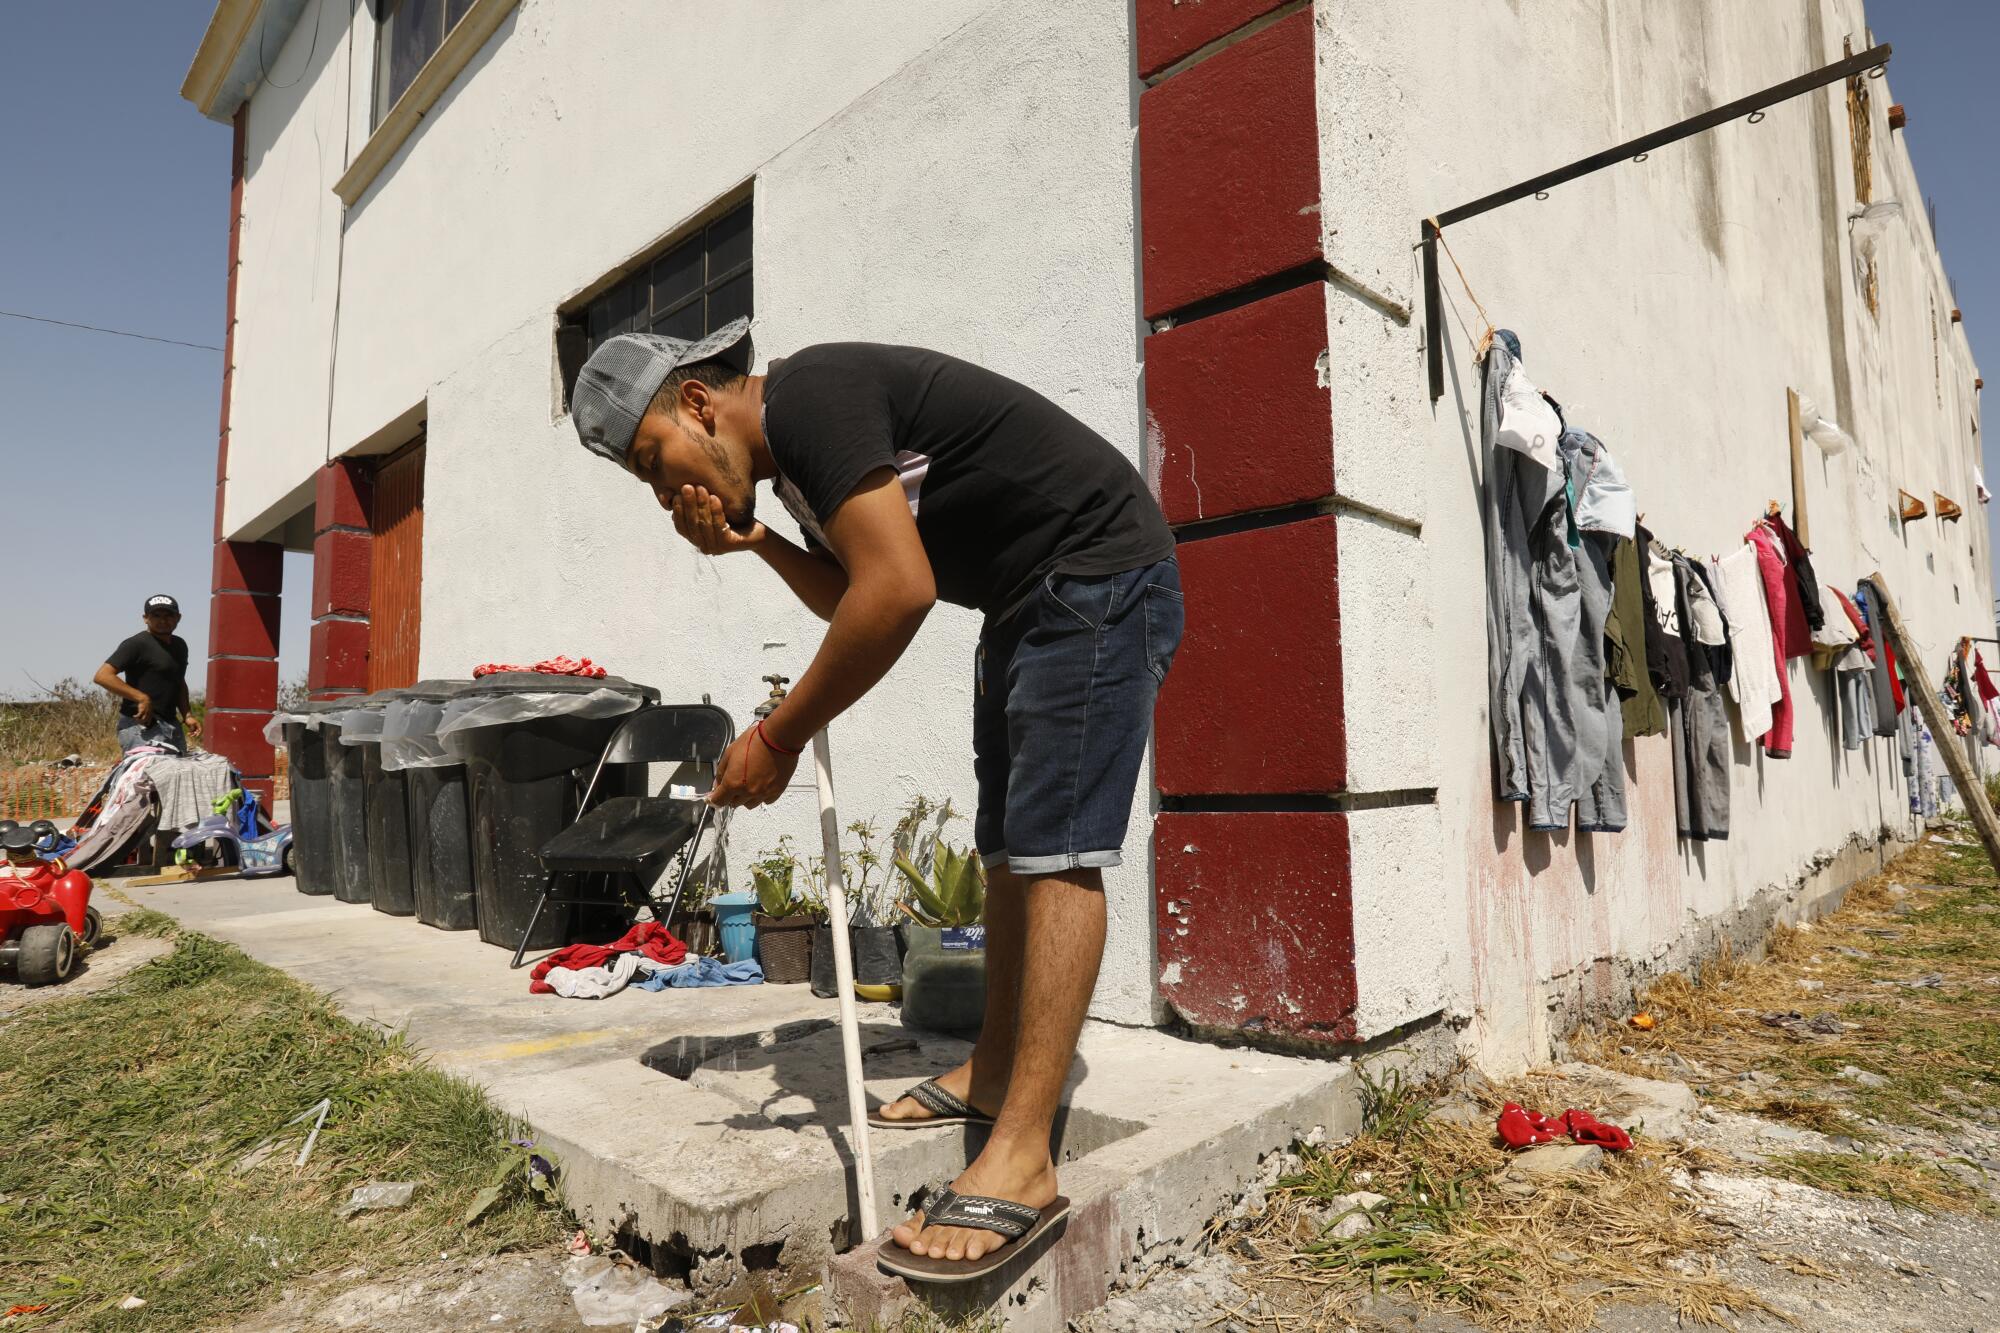 A migrant draws water from an outdoor faucet.